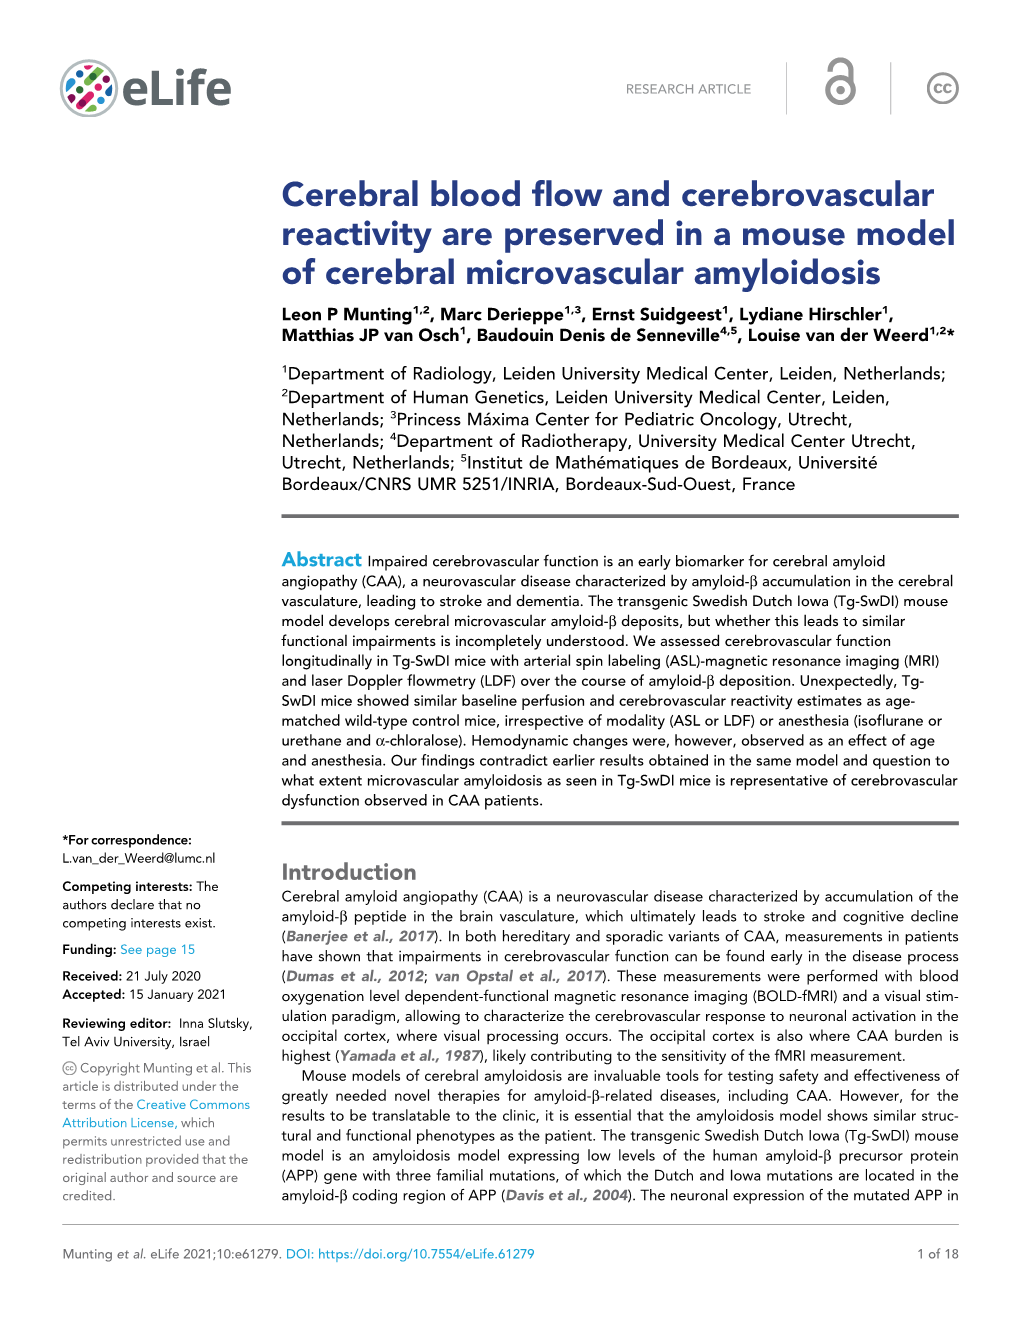 Cerebral Blood Flow and Cerebrovascular Reactivity Are Preserved in a Mouse Model of Cerebral Microvascular Amyloidosis